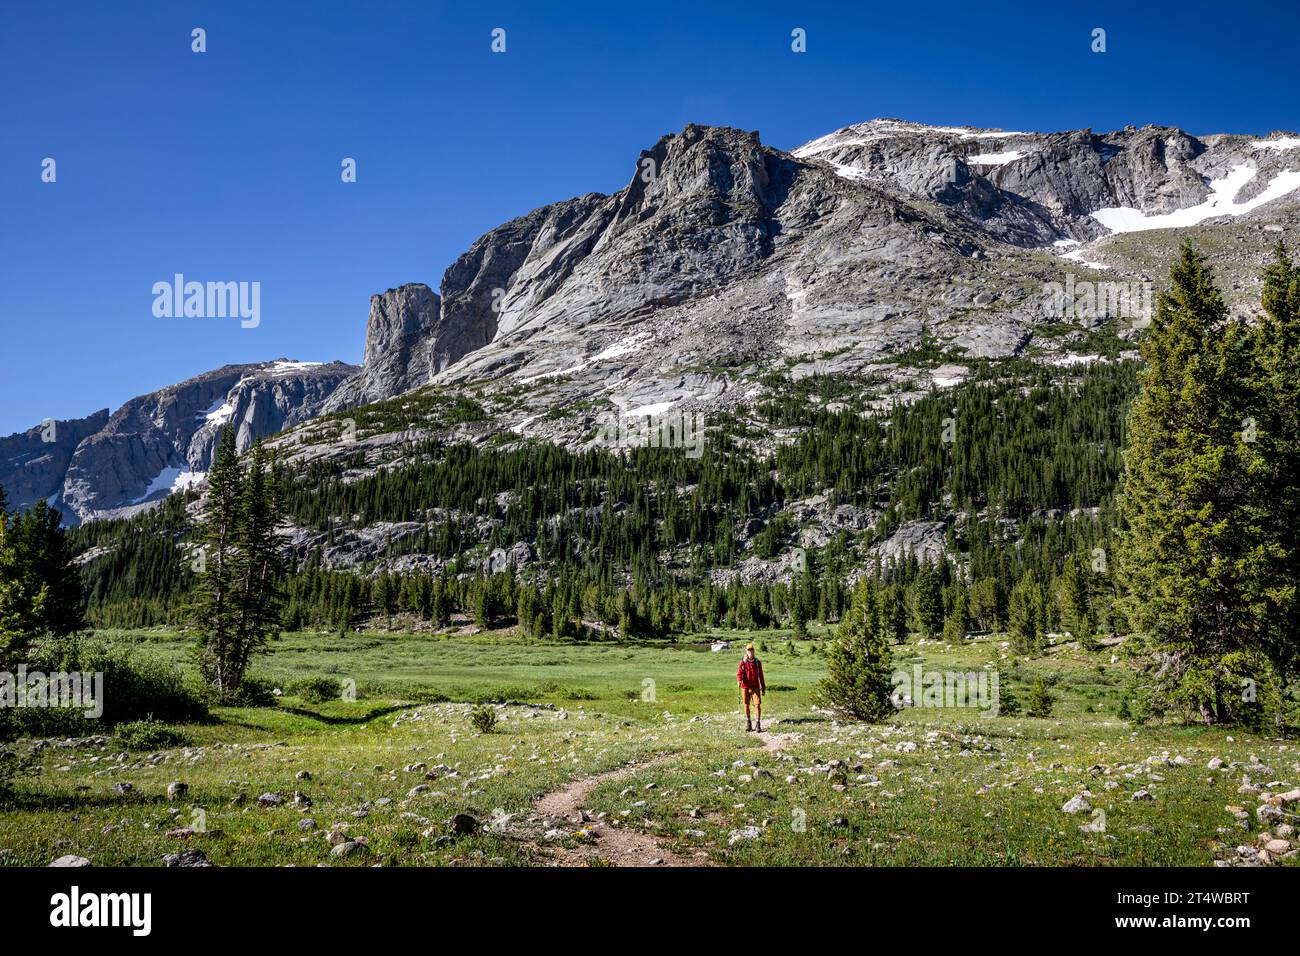 WY05565-00...WYOMING - Day hiker heading up the Lizard Head Trail in the Popo Agie Wilderness area of the Wind River Range. Stock Photo